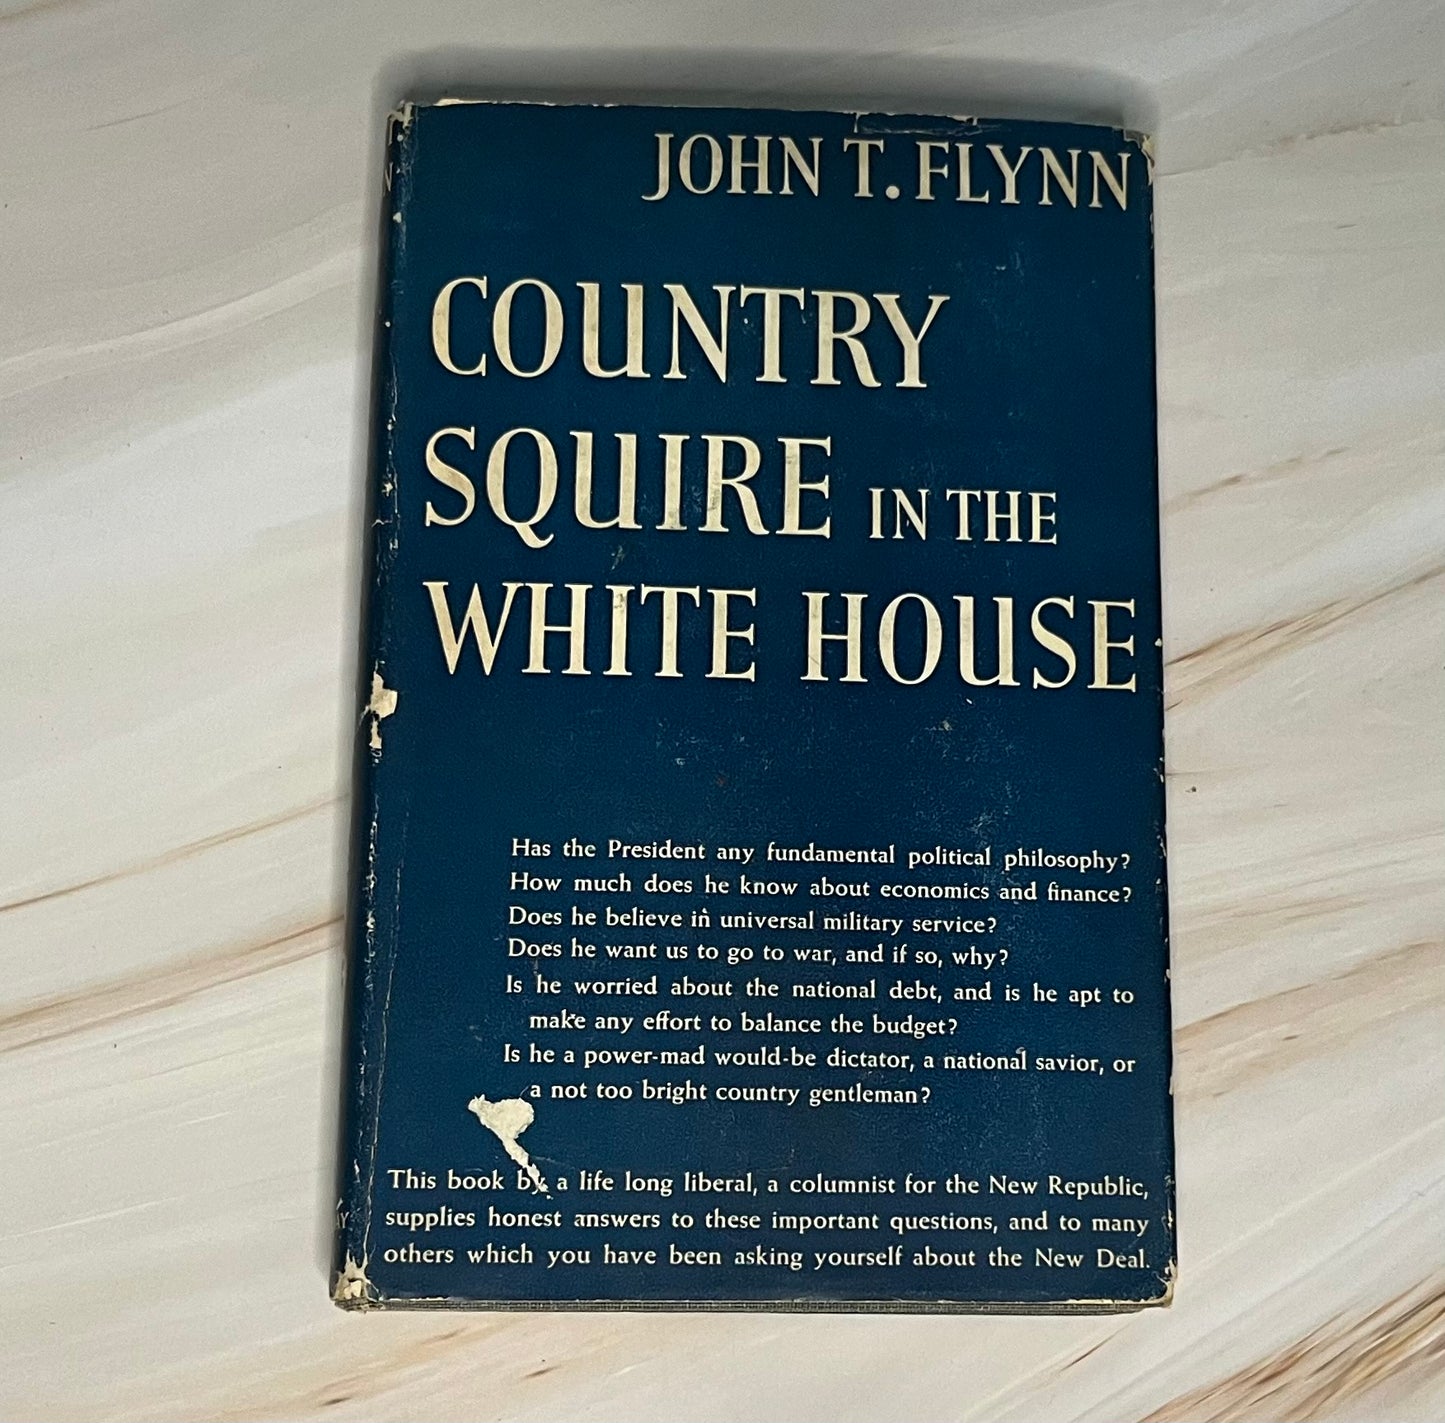 Country Squire in the White House: John T. Flynn (1940) - Vintage Political Commentary